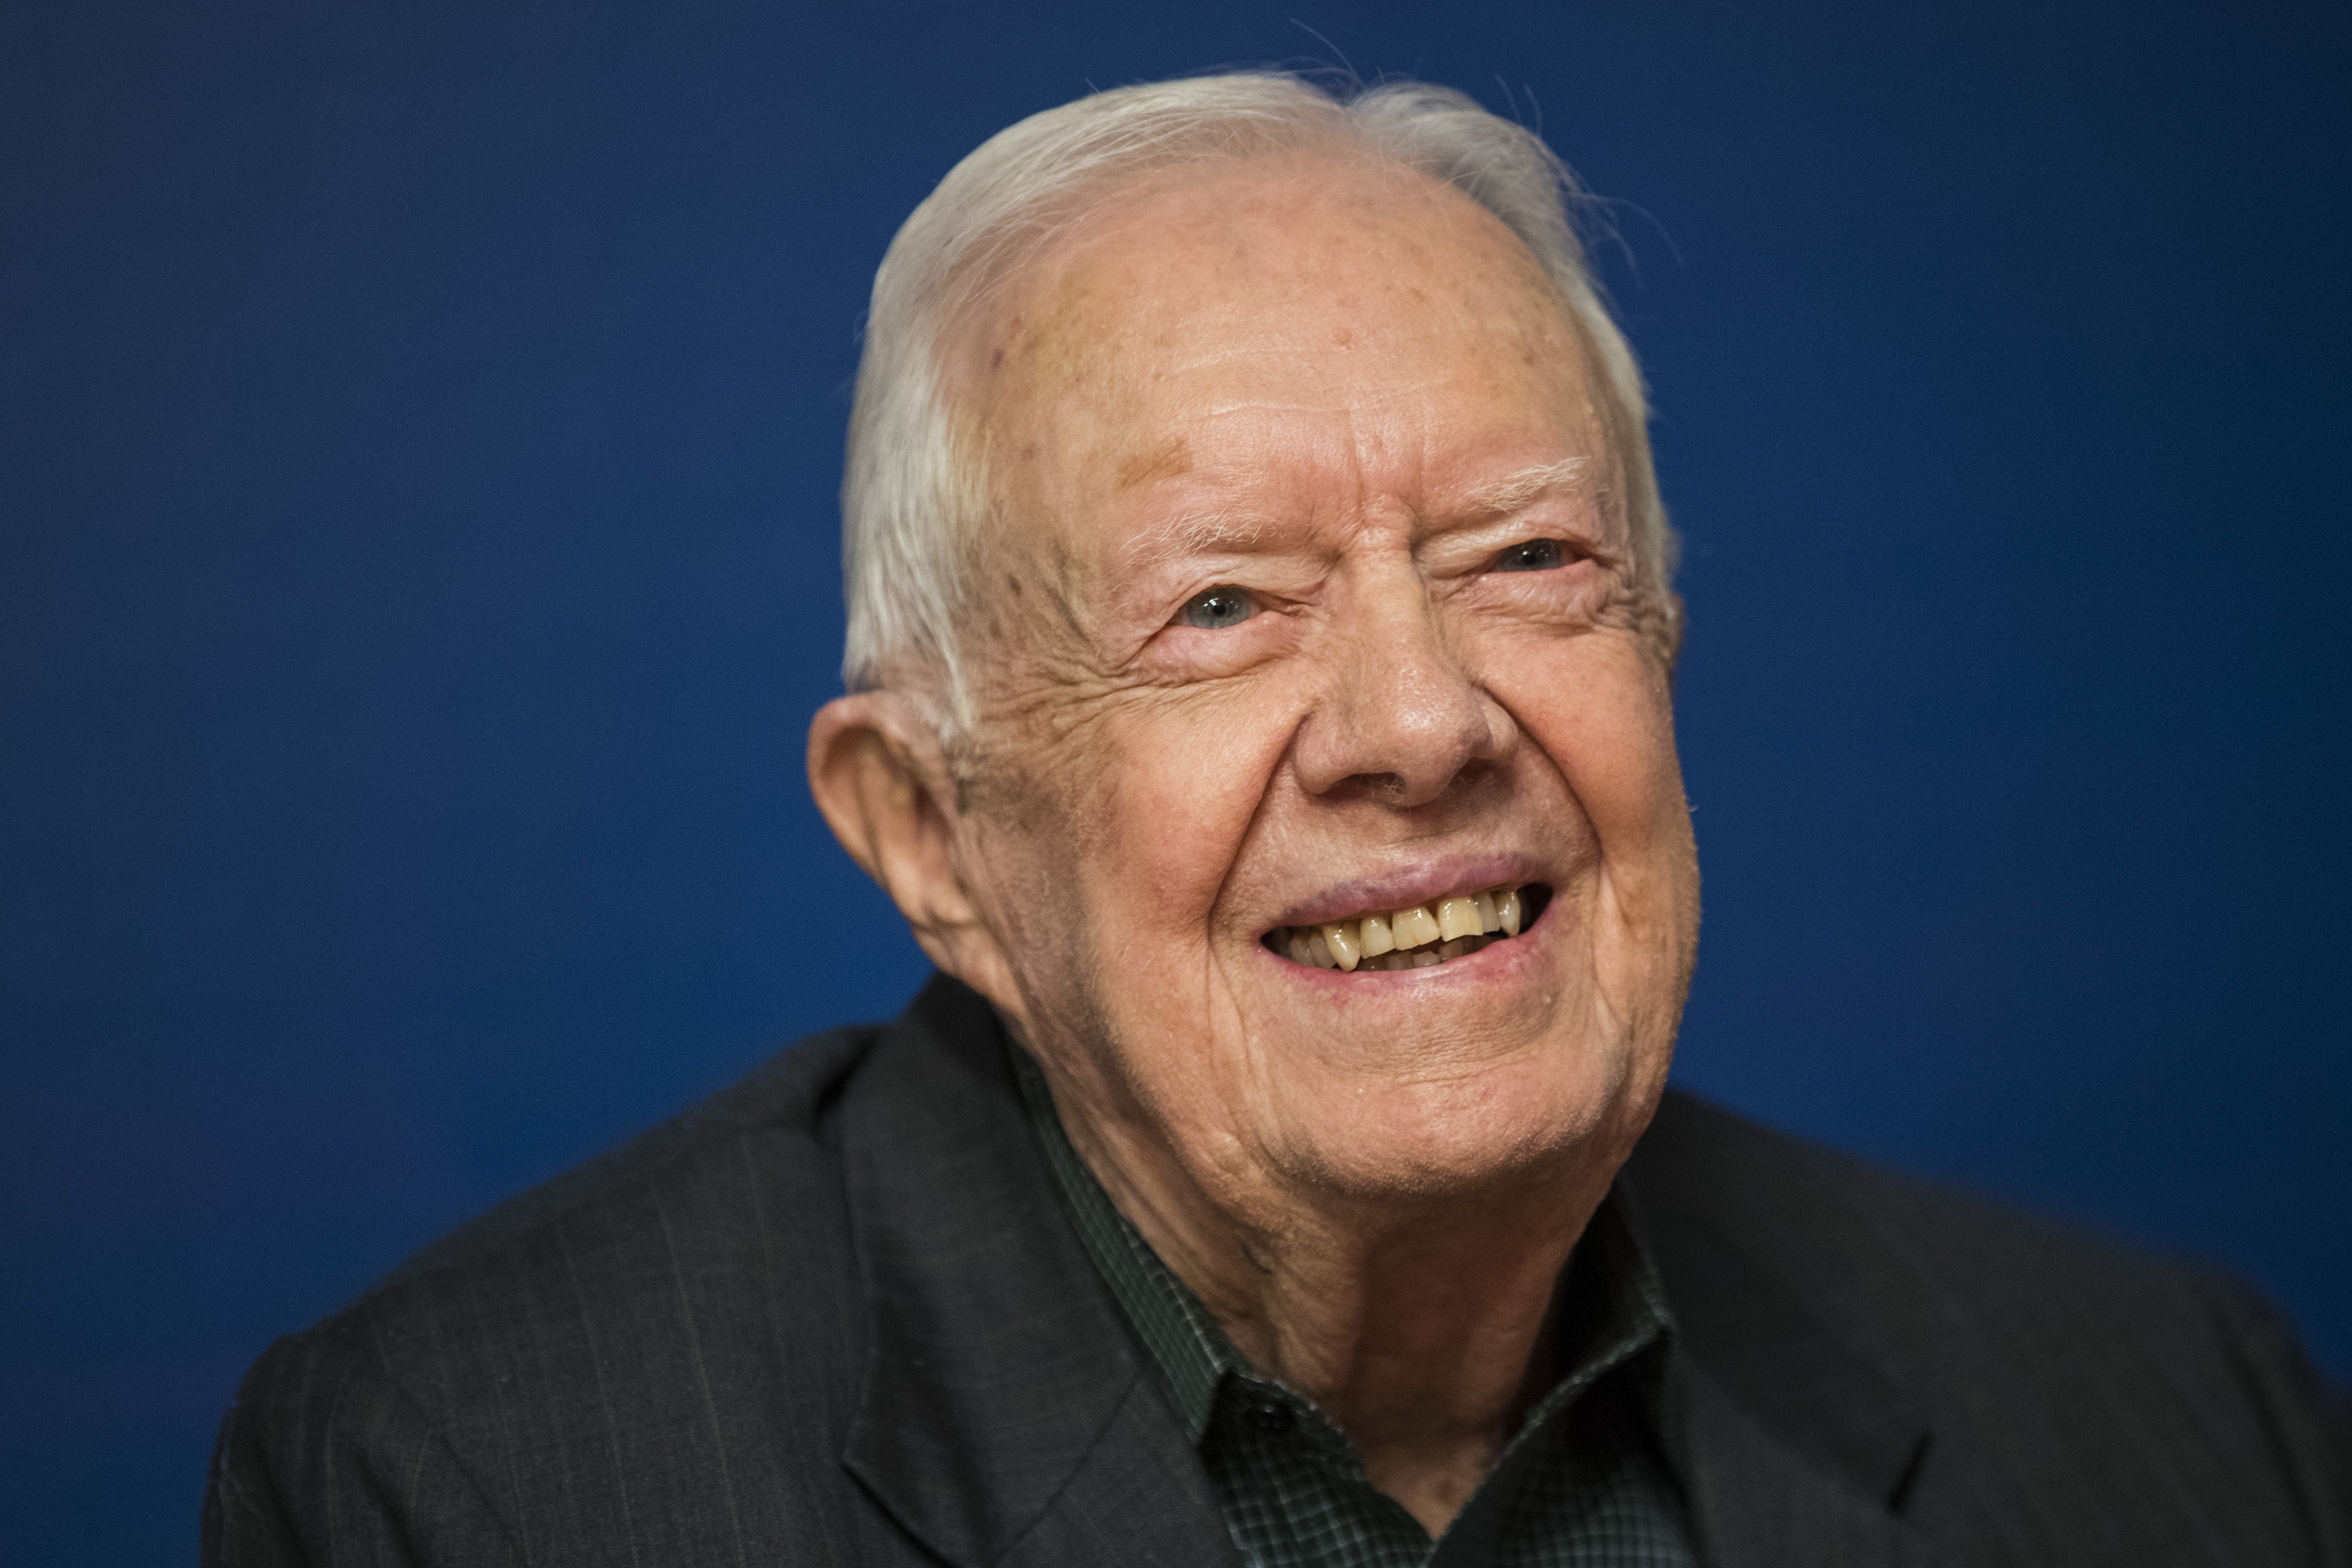 Jimmy Carter smiles during a book signing event for his new book 'Faith: A Journey For All' at Barnes & Noble bookstore in Midtown Manhattan, March 26, 2018, in New York City. | Source: Getty Images.